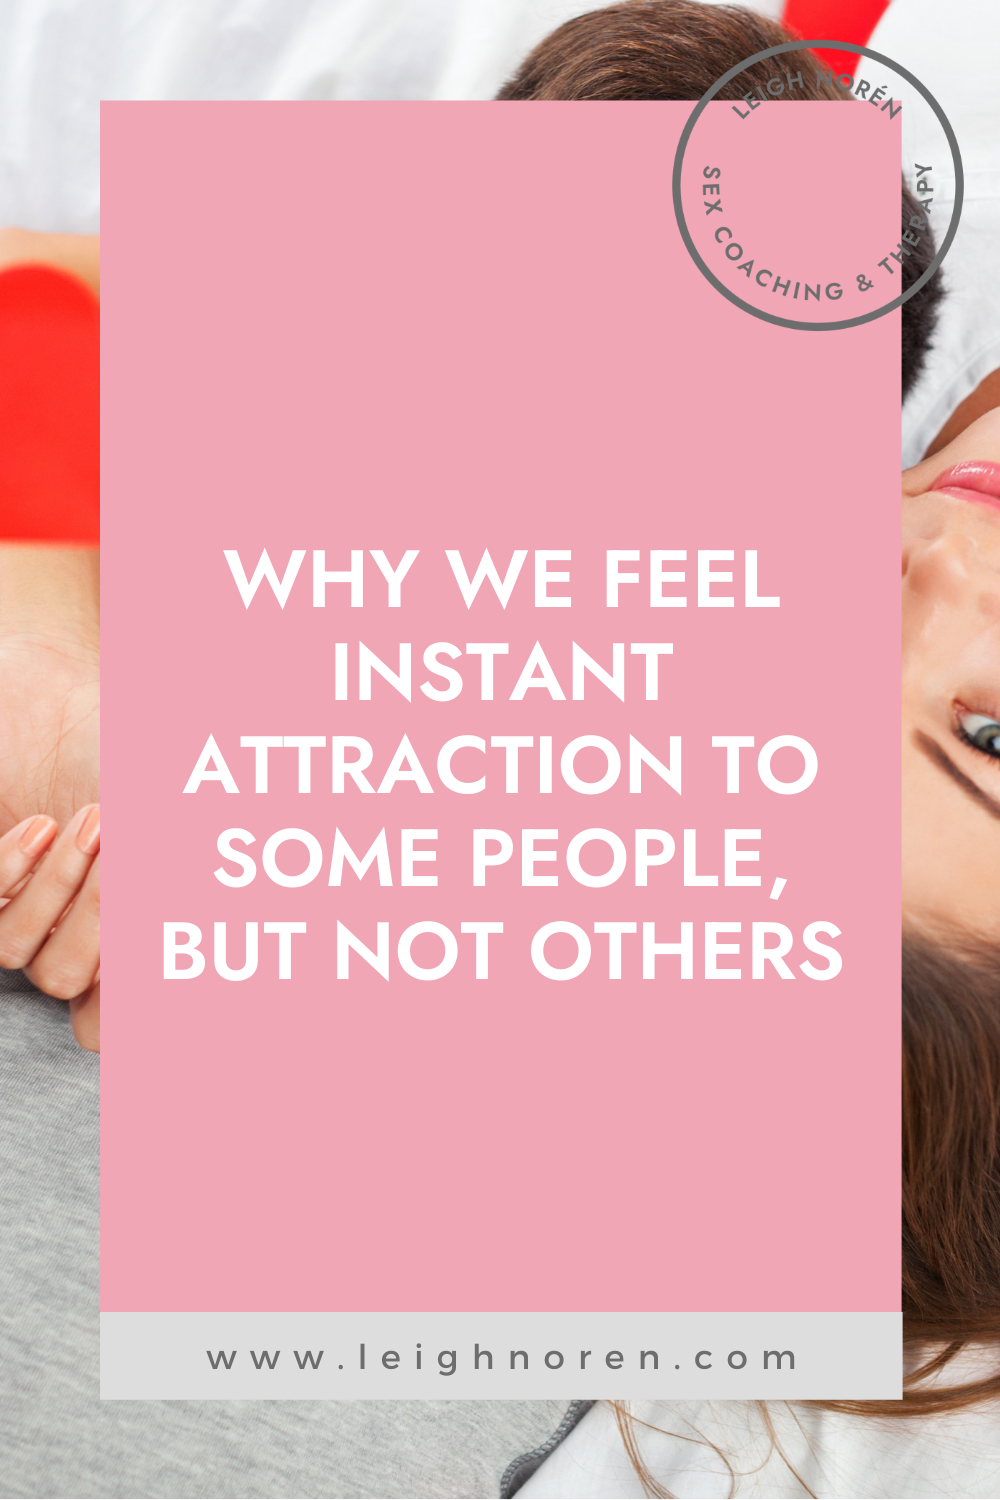 Is instant attraction possible?